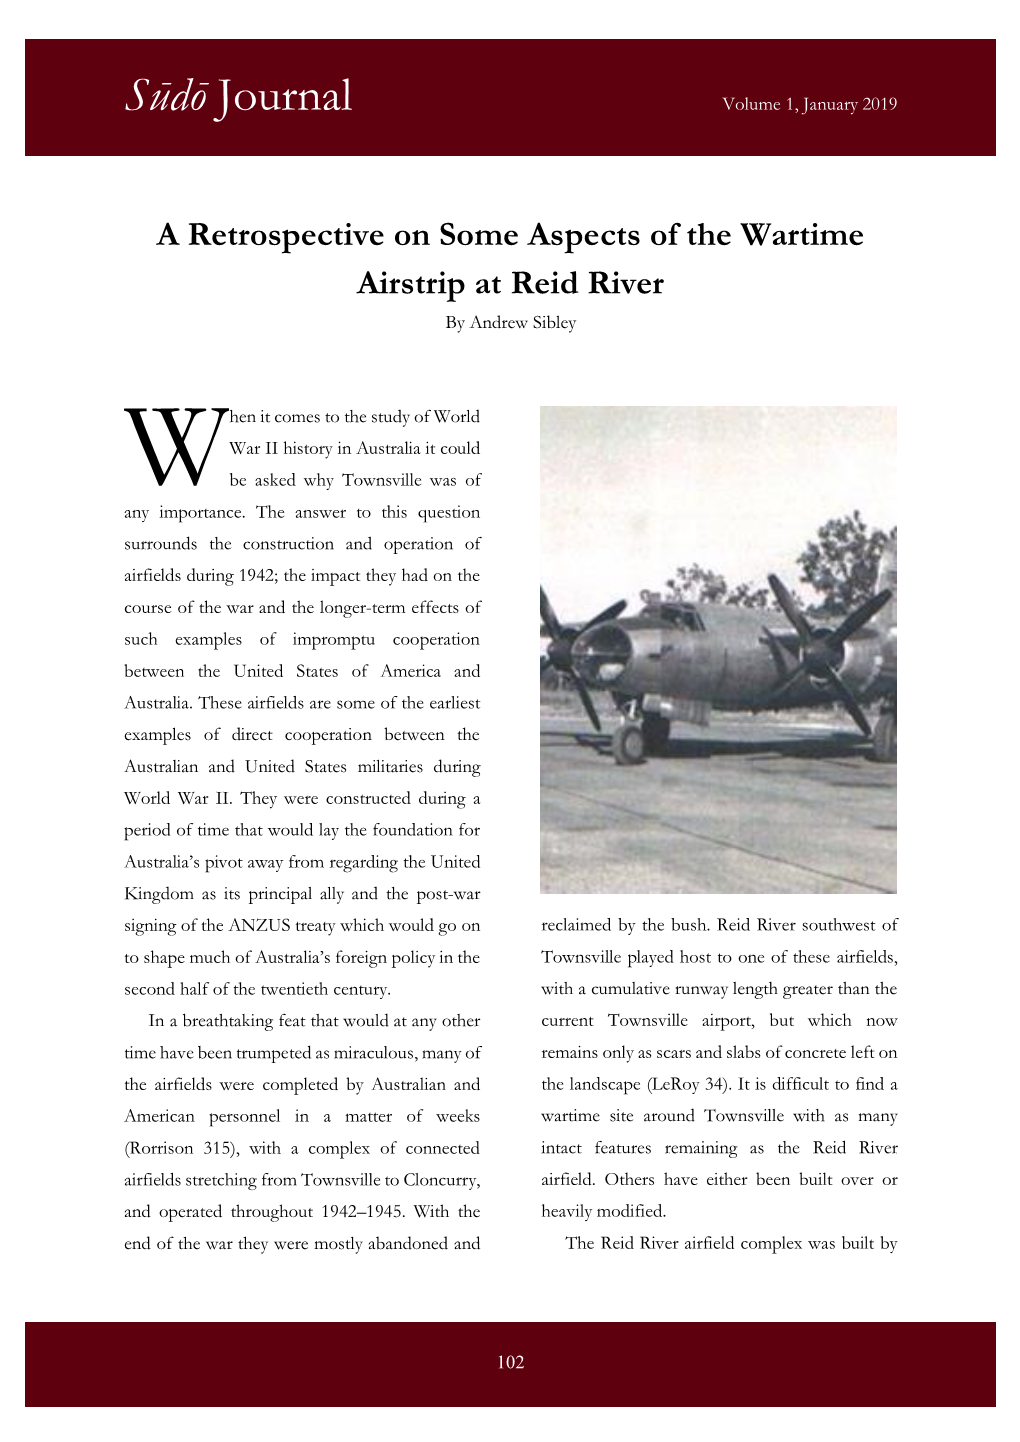 A Retrospective on Some Aspects of the Wartime Airstrip at Reid River by Andrew Sibley